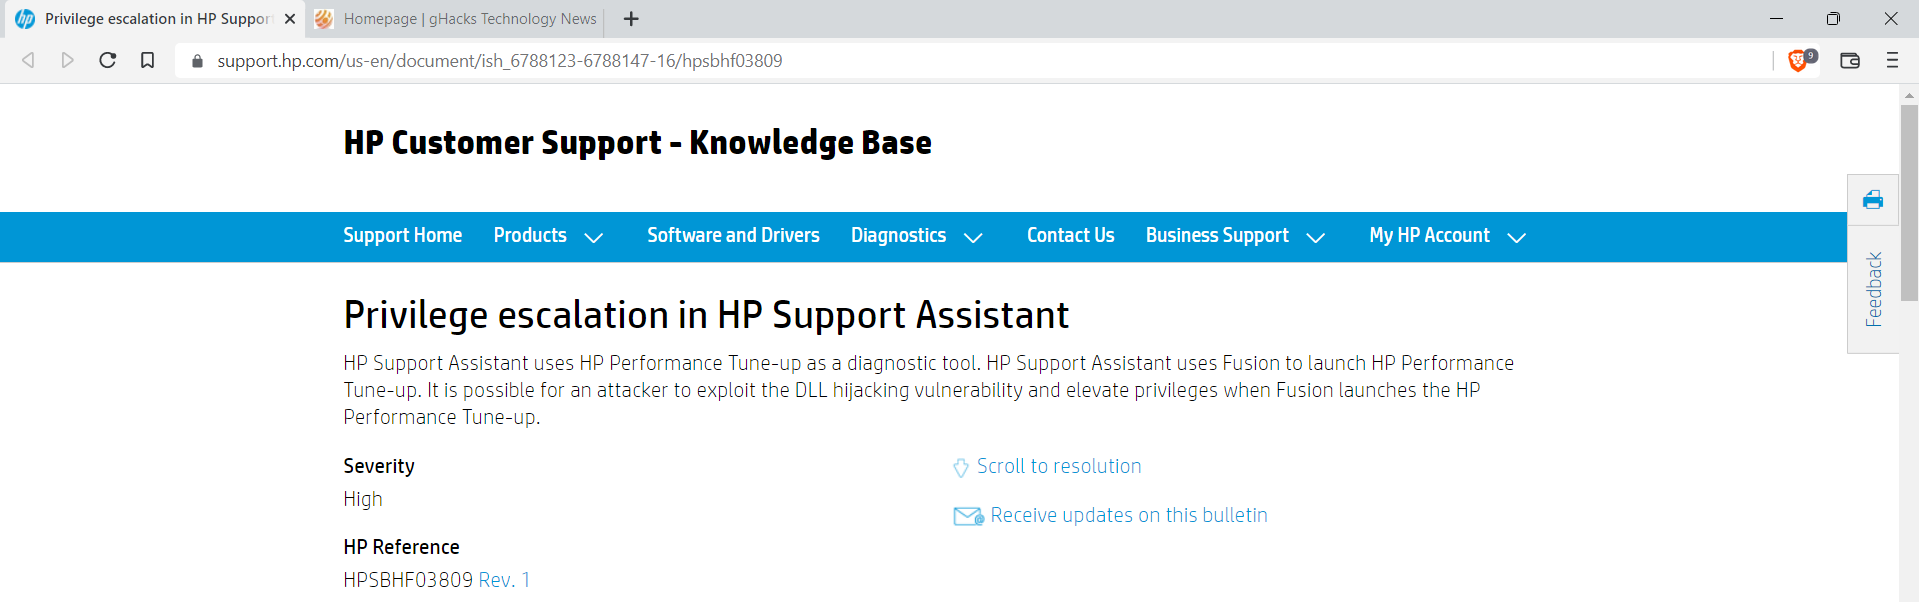 HP Support Assistant has a DLL Hijacking Vulnerability